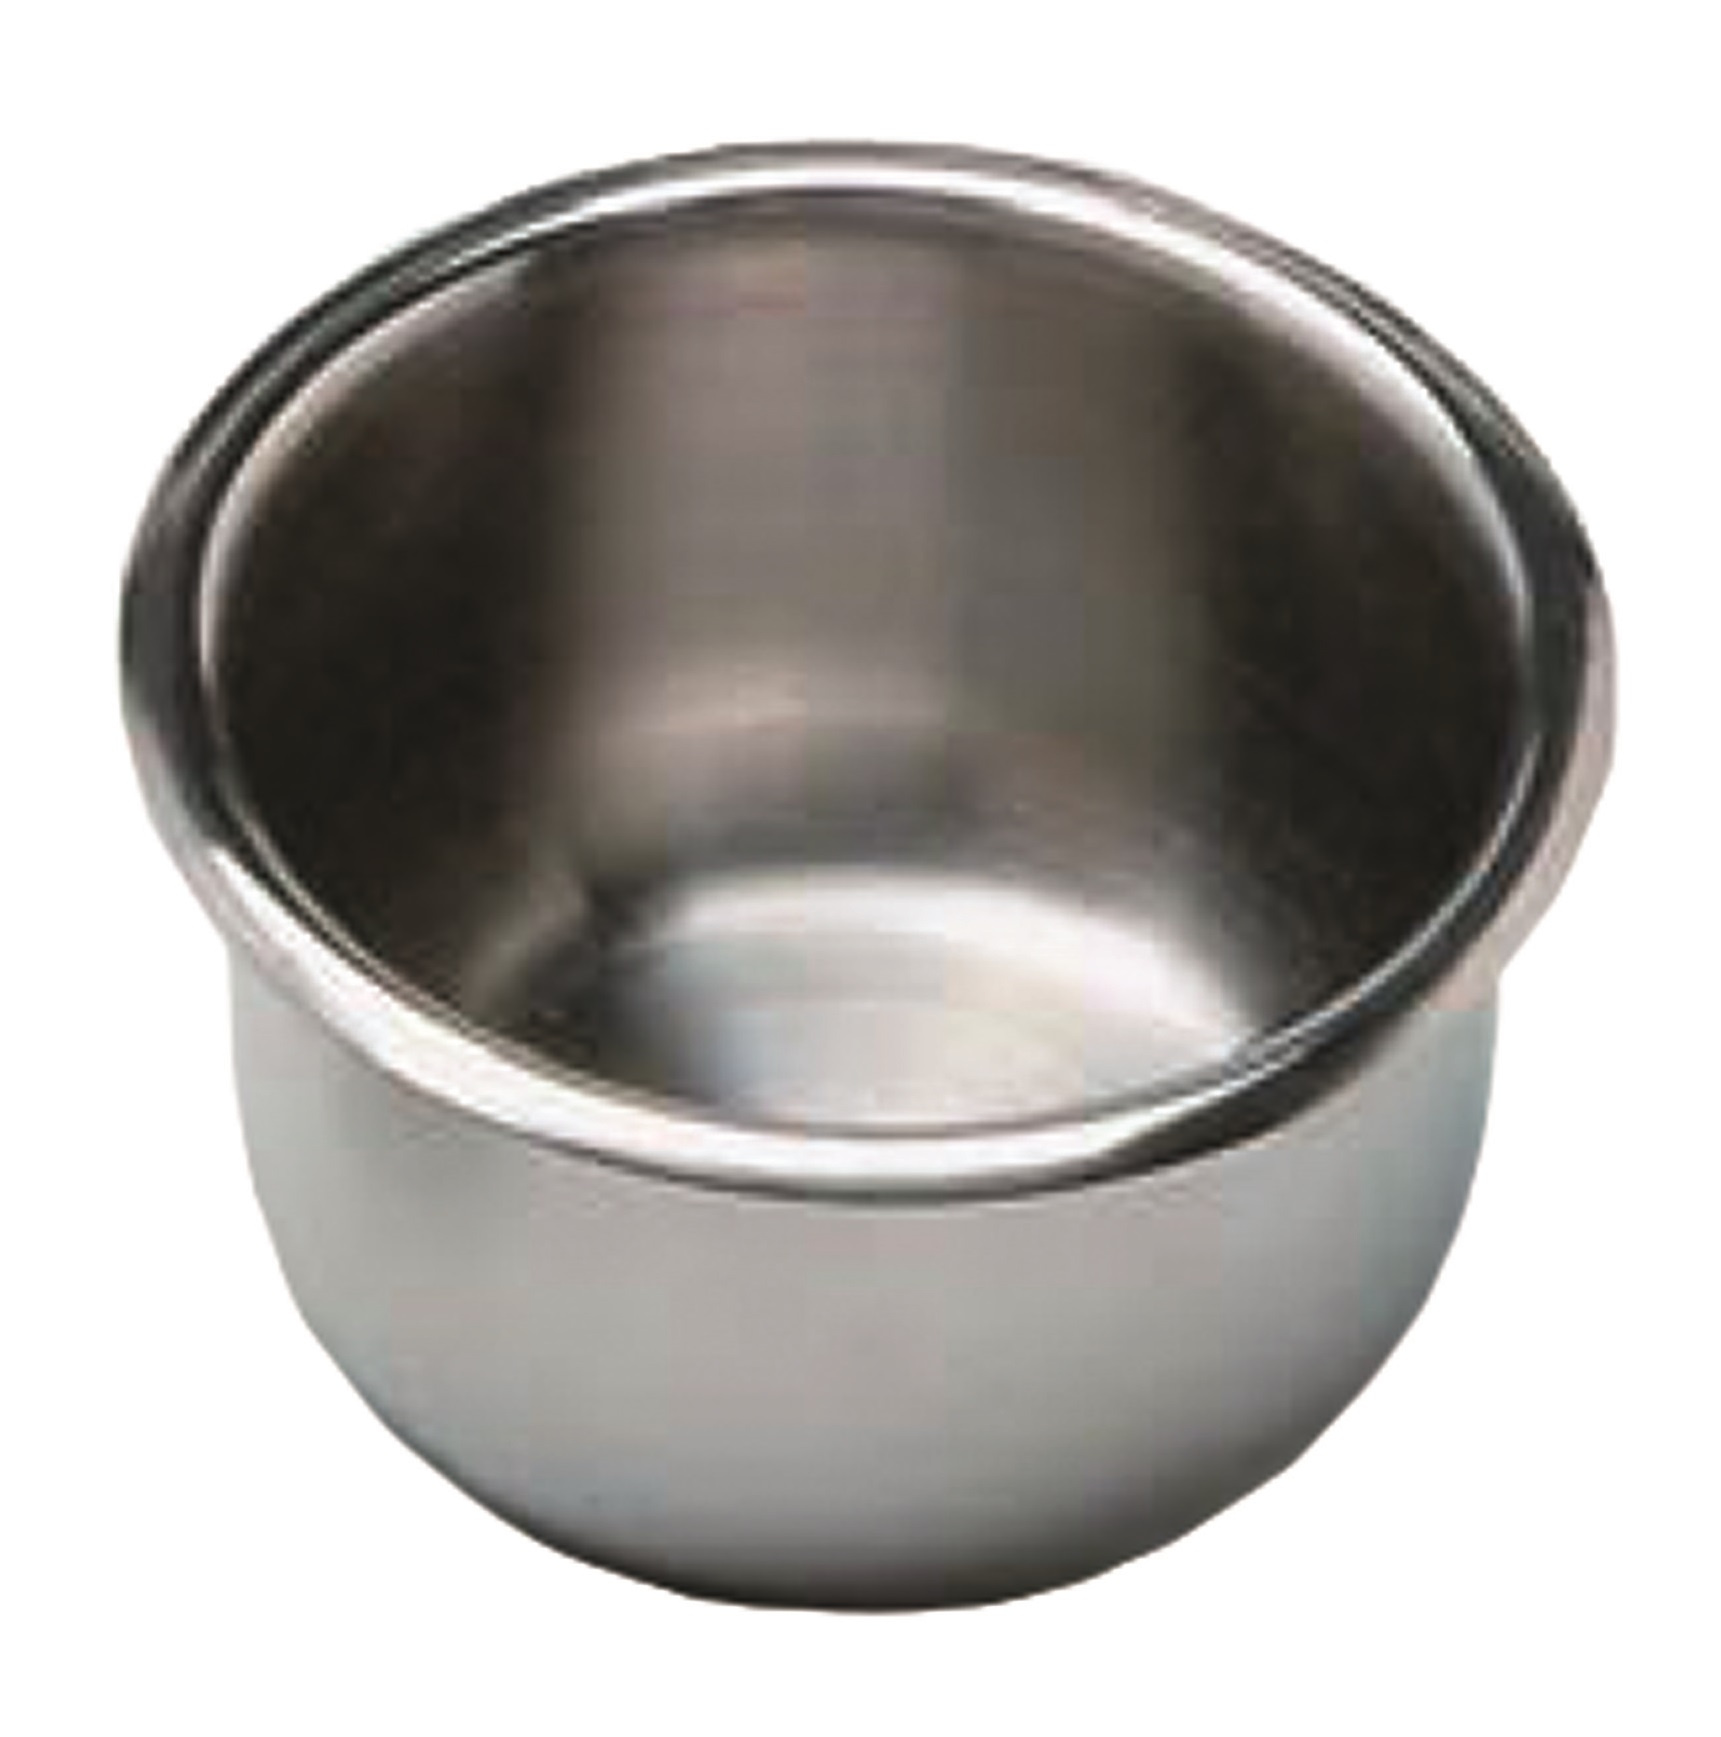 Iodine Bowl Stainless Steel 110cc 77x43mm image 0